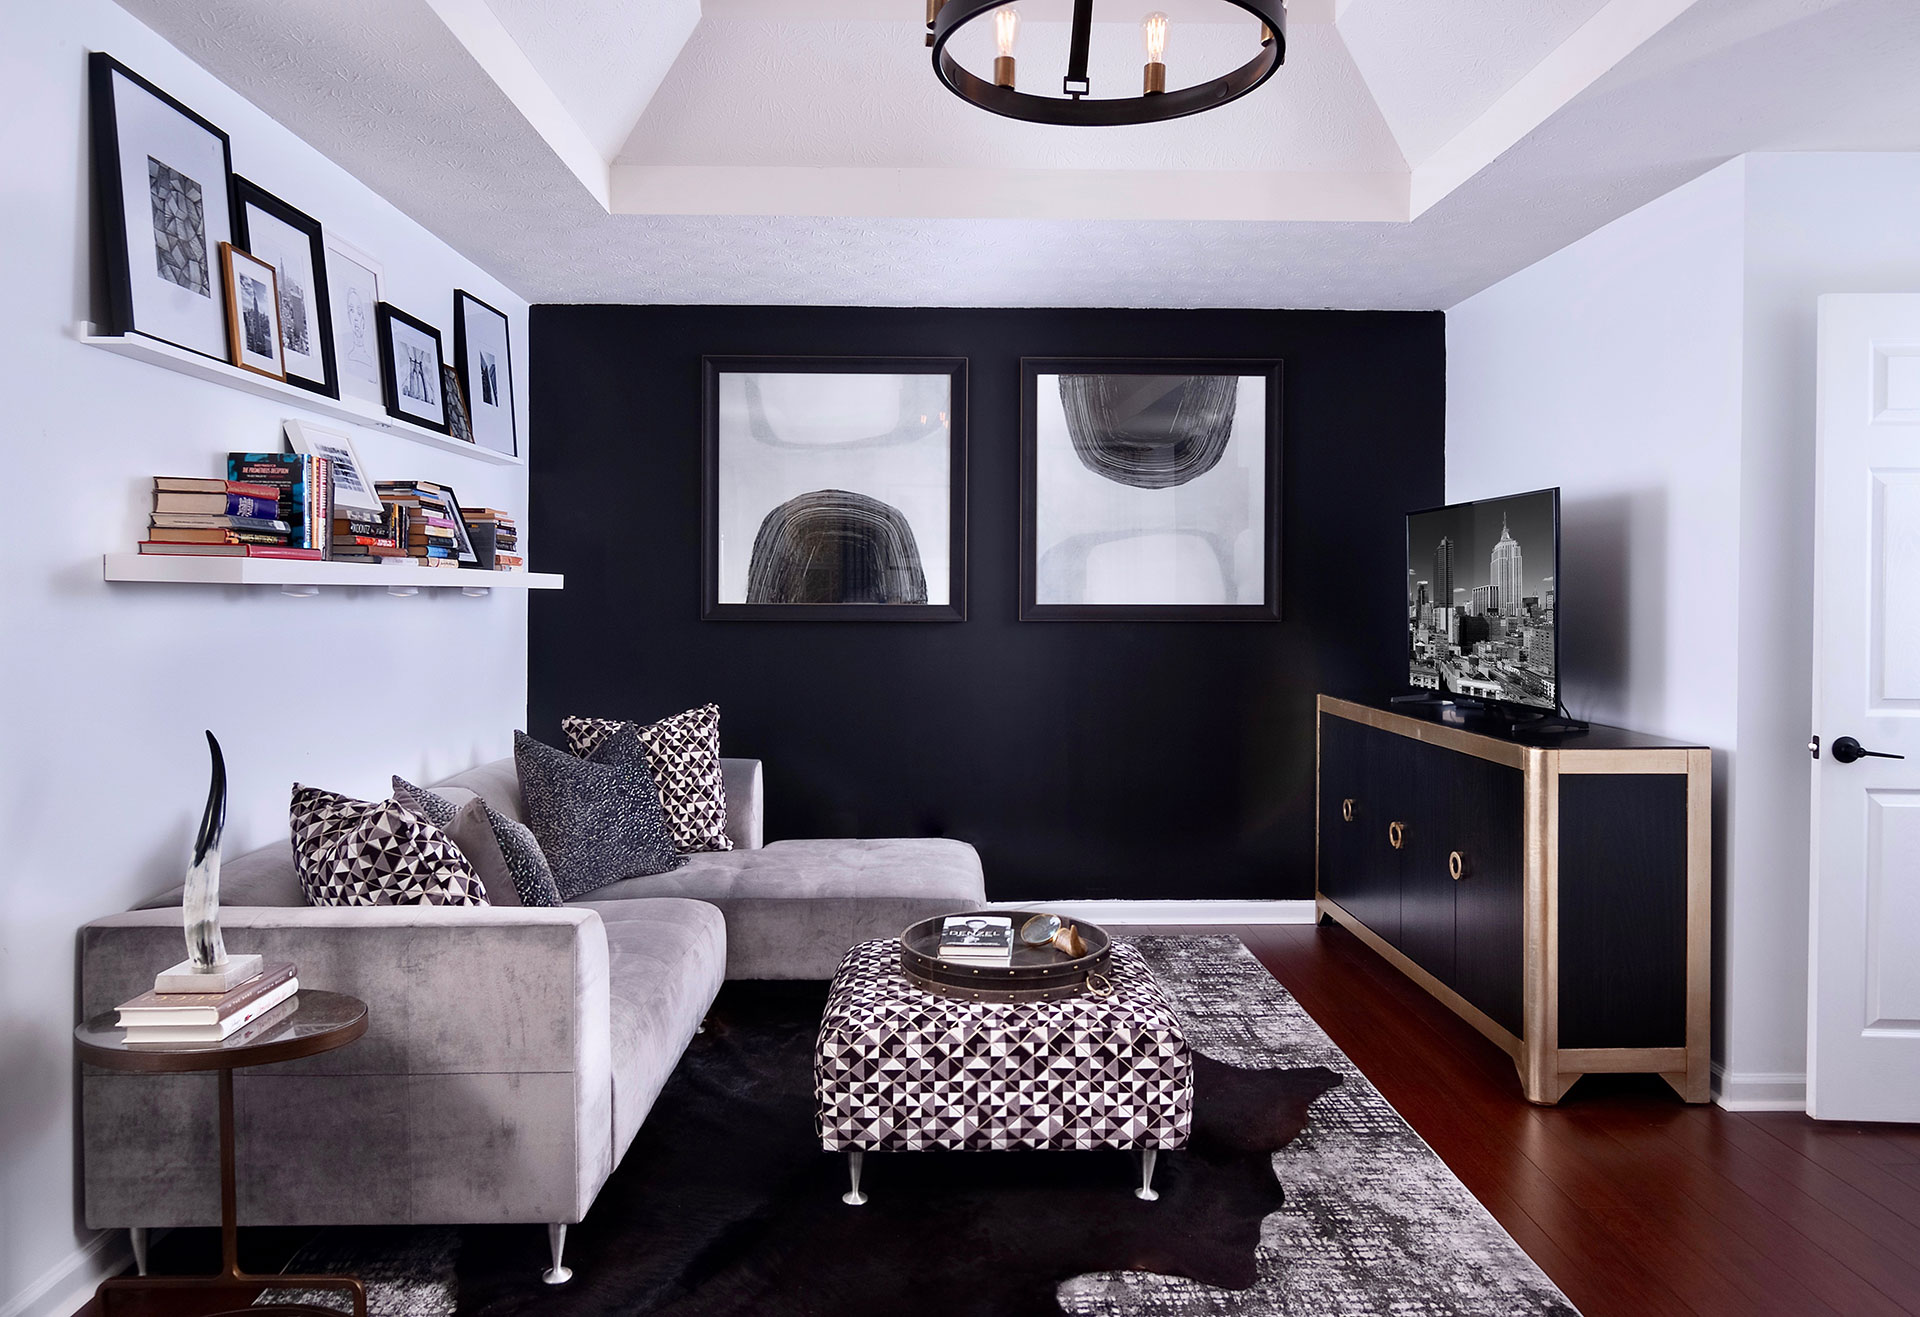 Black trim in the interior design - how to use it as an accent?